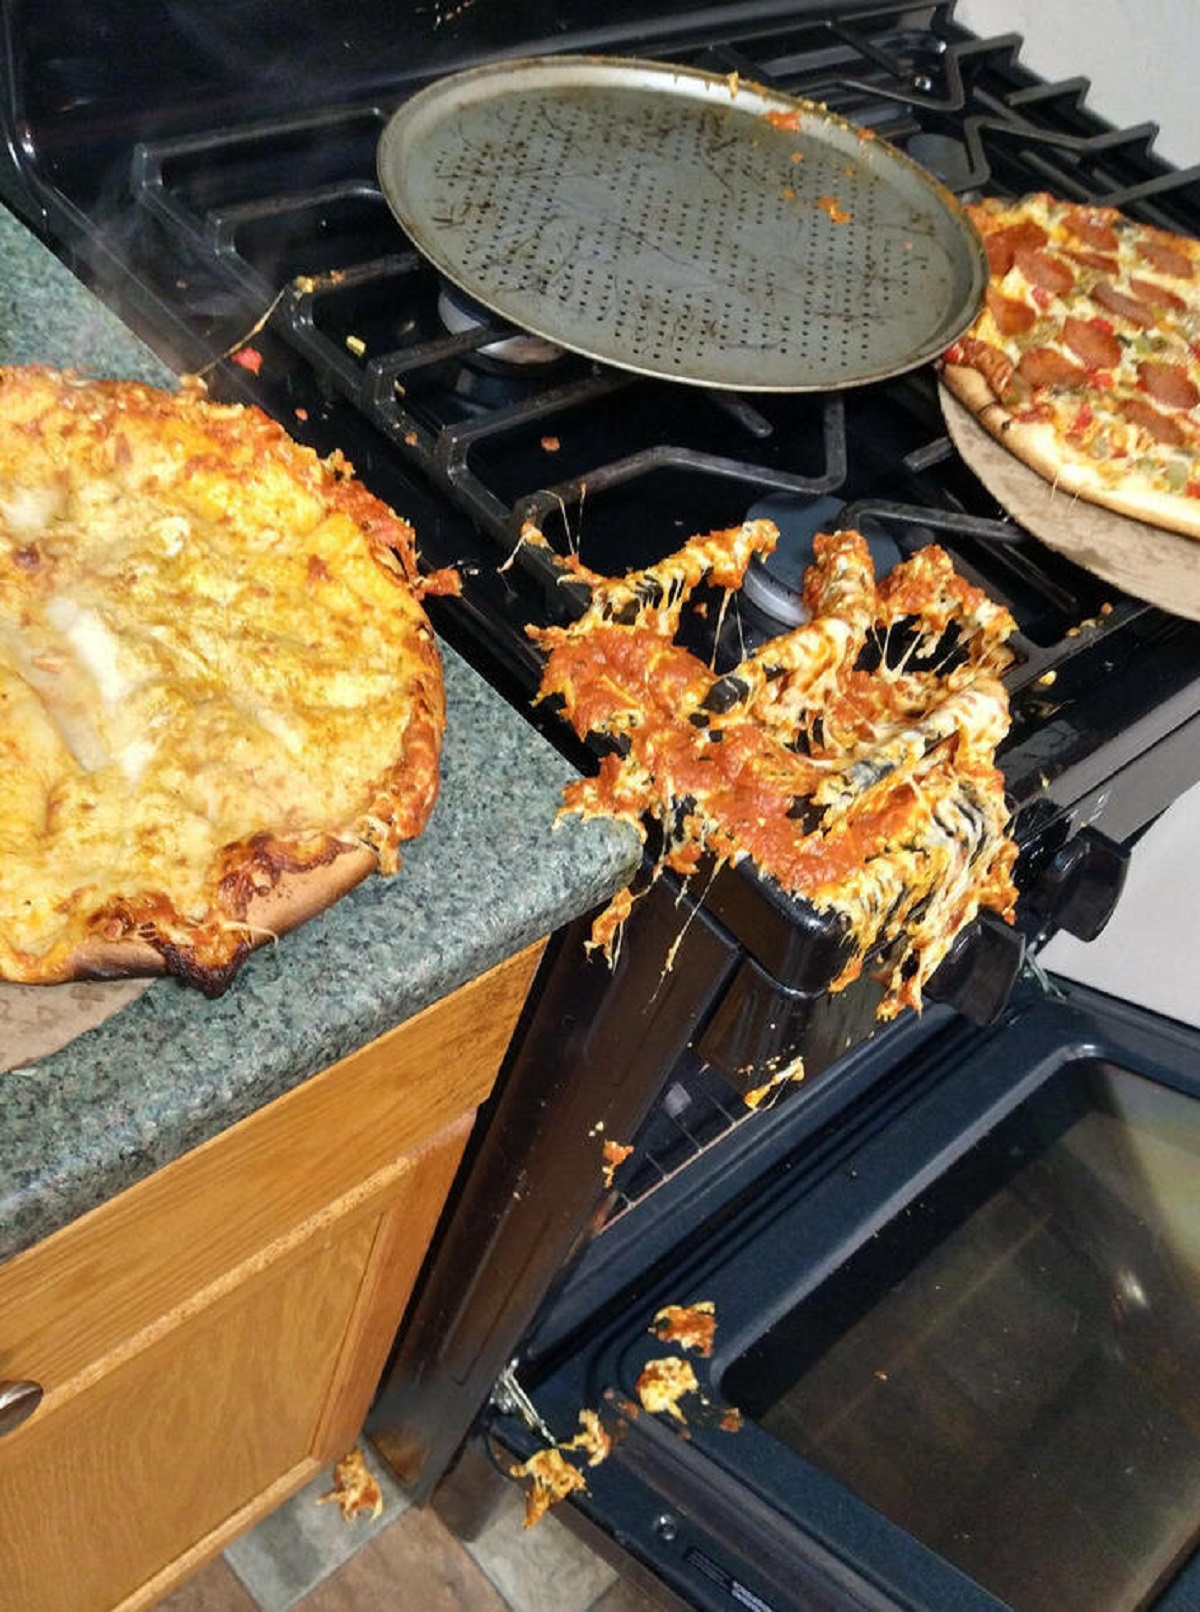 “When this happens, it means I overcooked the pizza.”